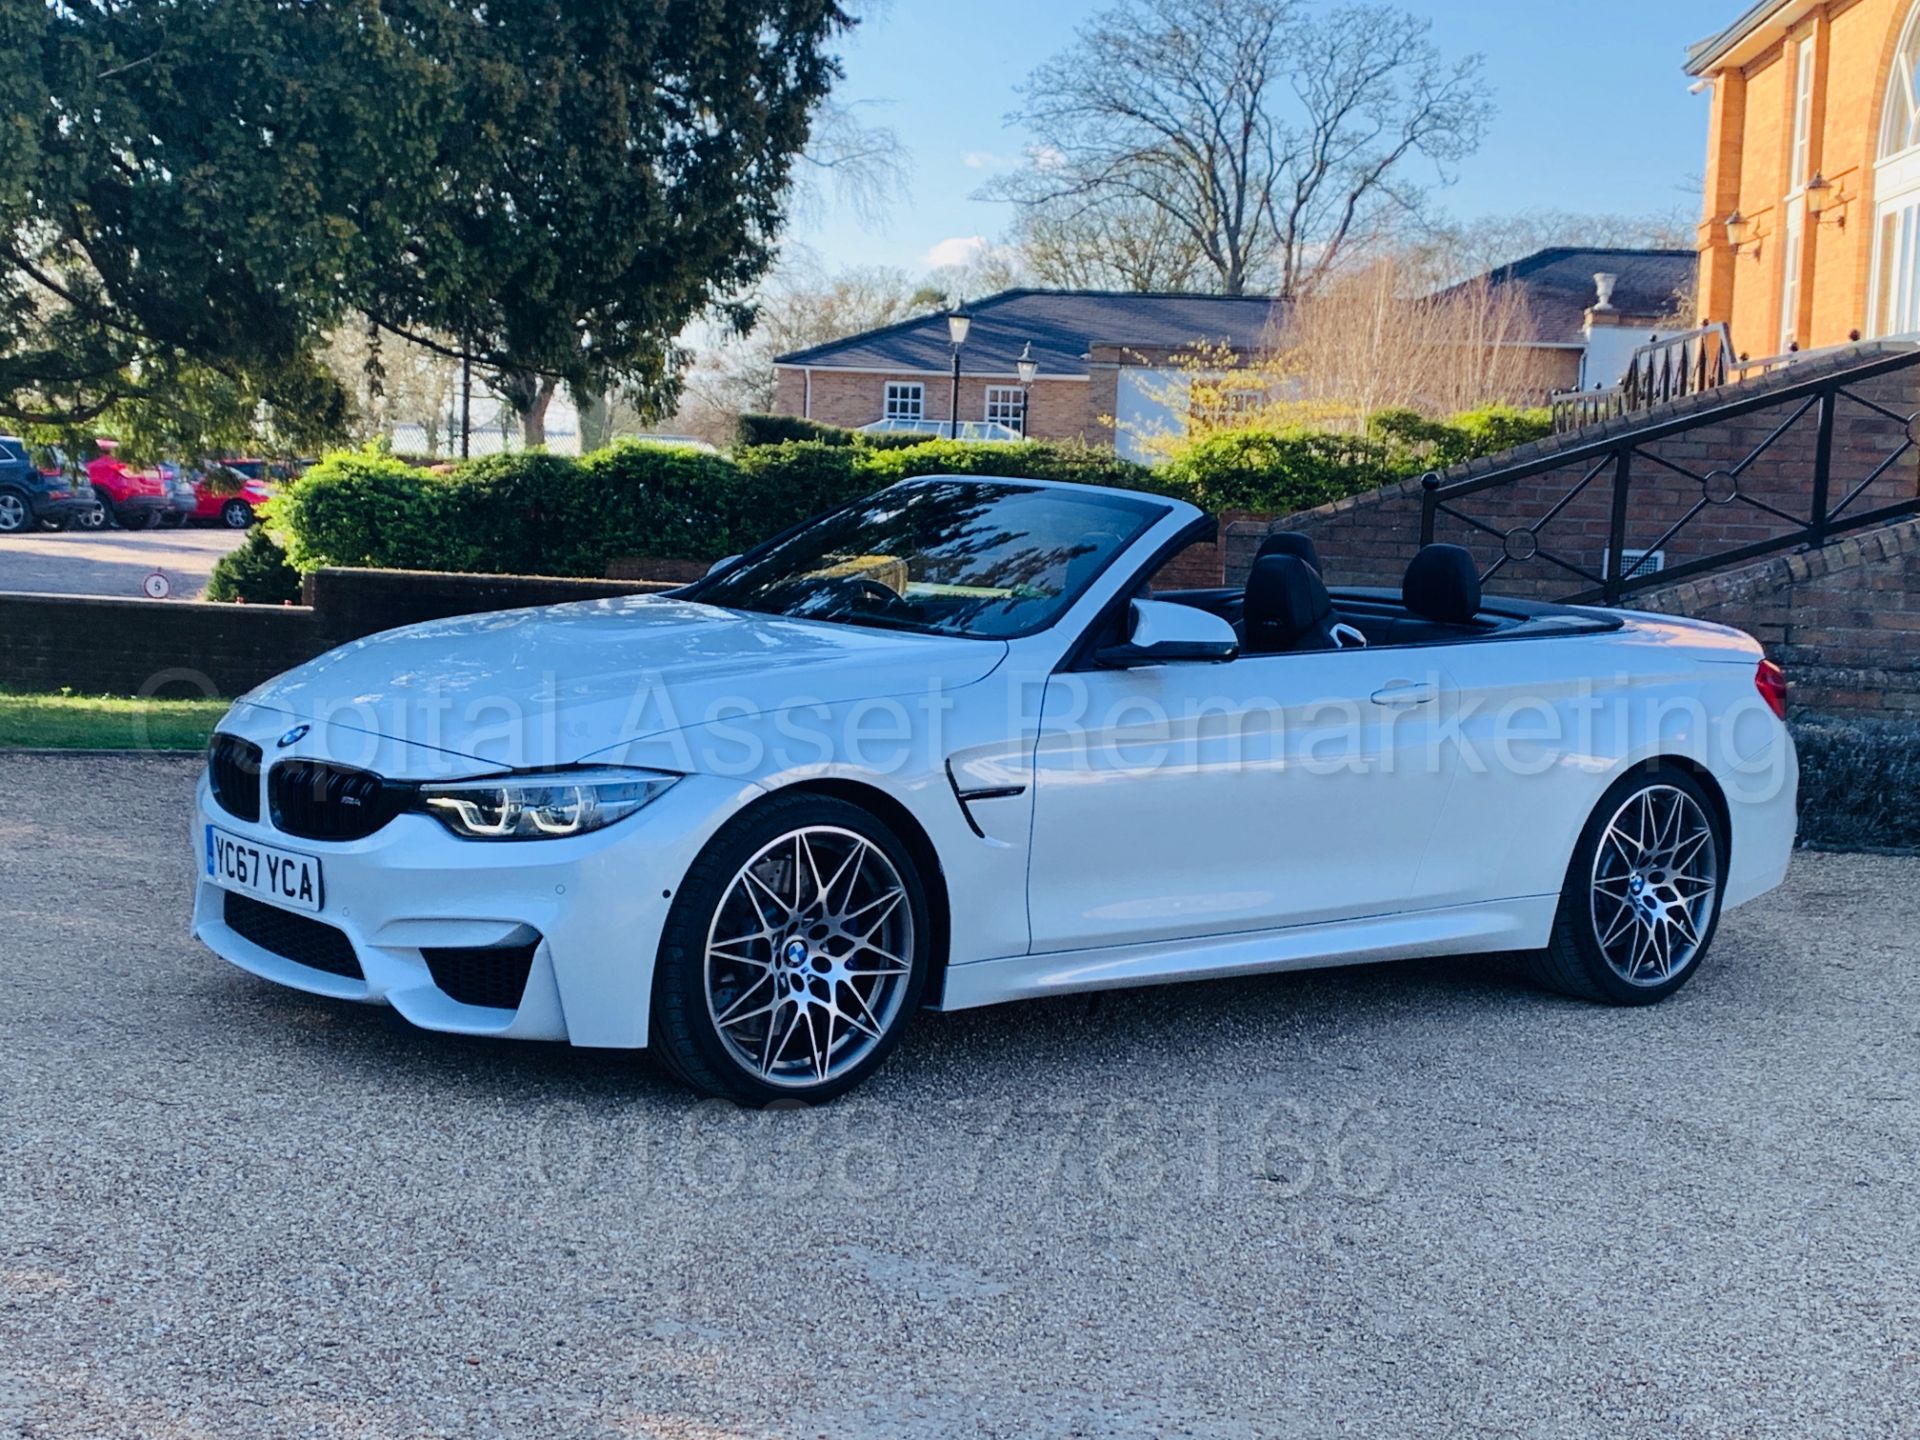 (On Sale) BMW M4 CONVERTIBLE *COMPETITION PACKAGE* (67 REG) 'M DCT AUTO - LEATHER - SAT NAV' *WOW* - Image 11 of 89